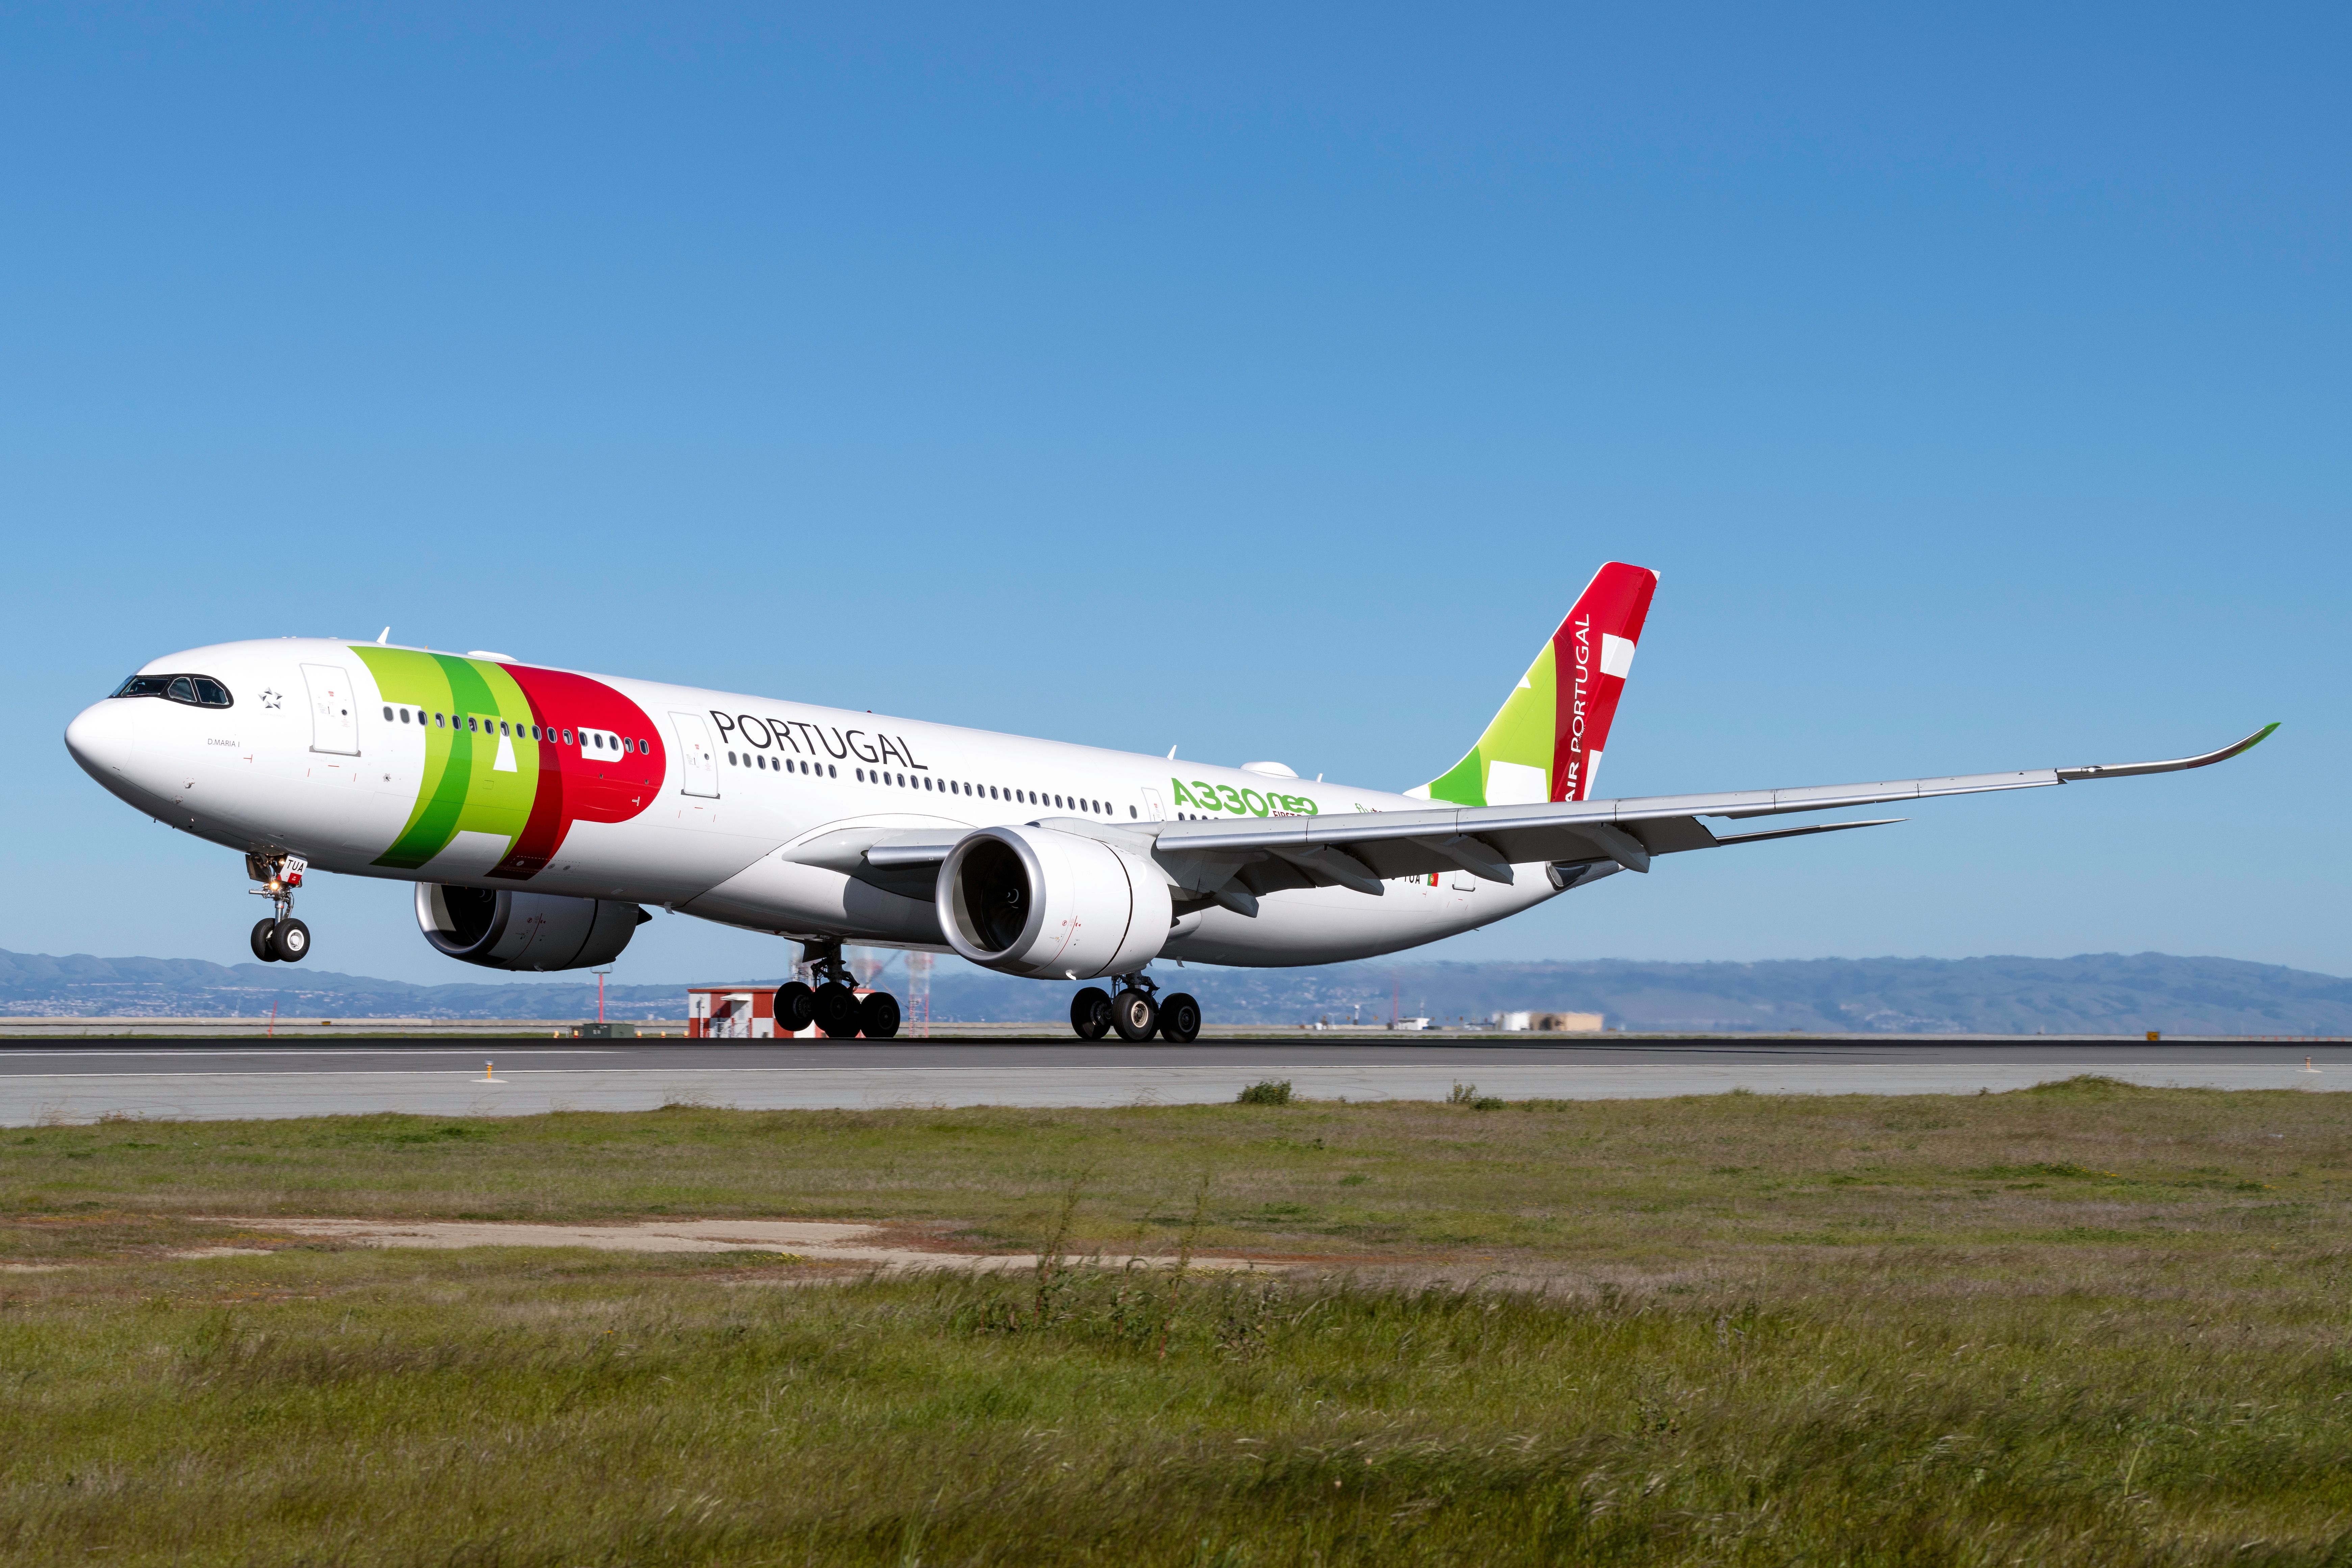 TAP Air Portugal A330-900neo pictured landing.